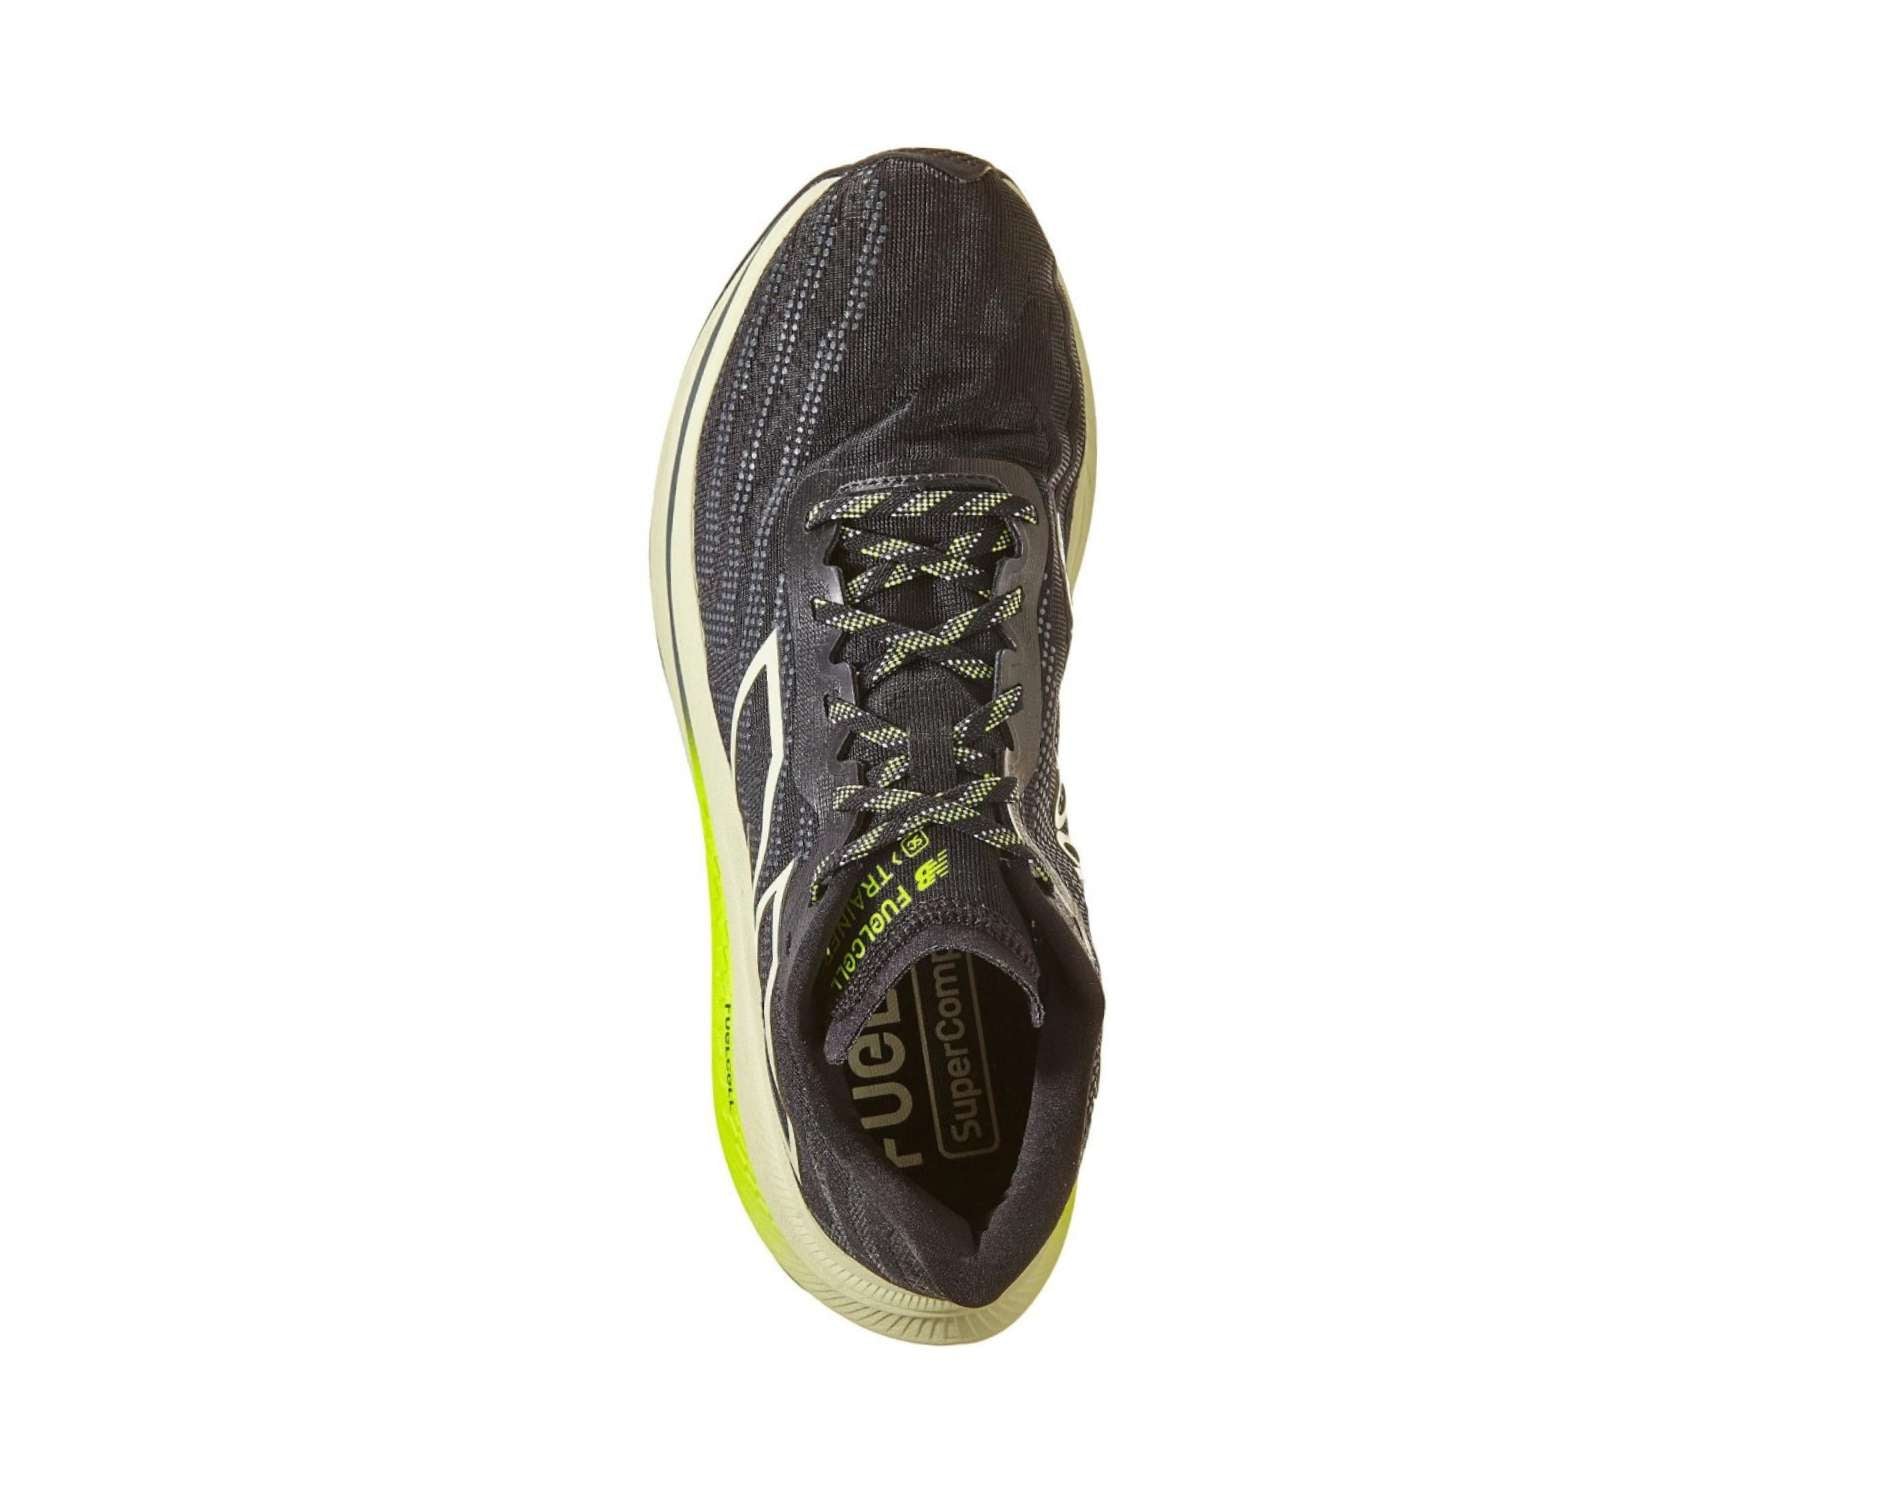 New Balance Fuelcell Supercomp Trainer V2 Mens